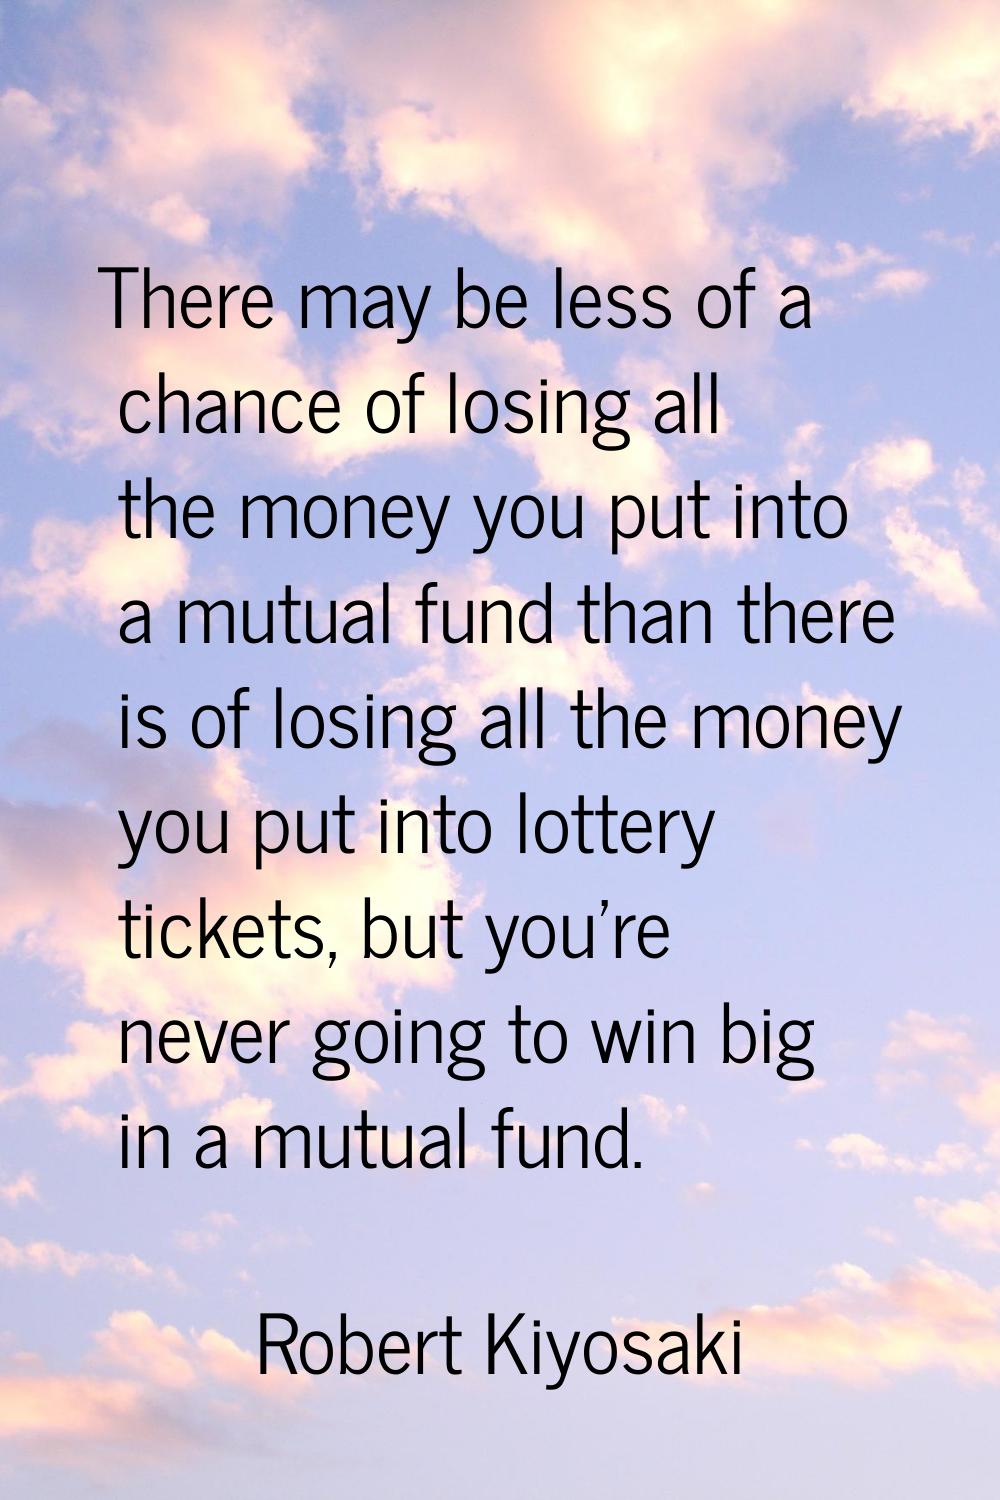 There may be less of a chance of losing all the money you put into a mutual fund than there is of l